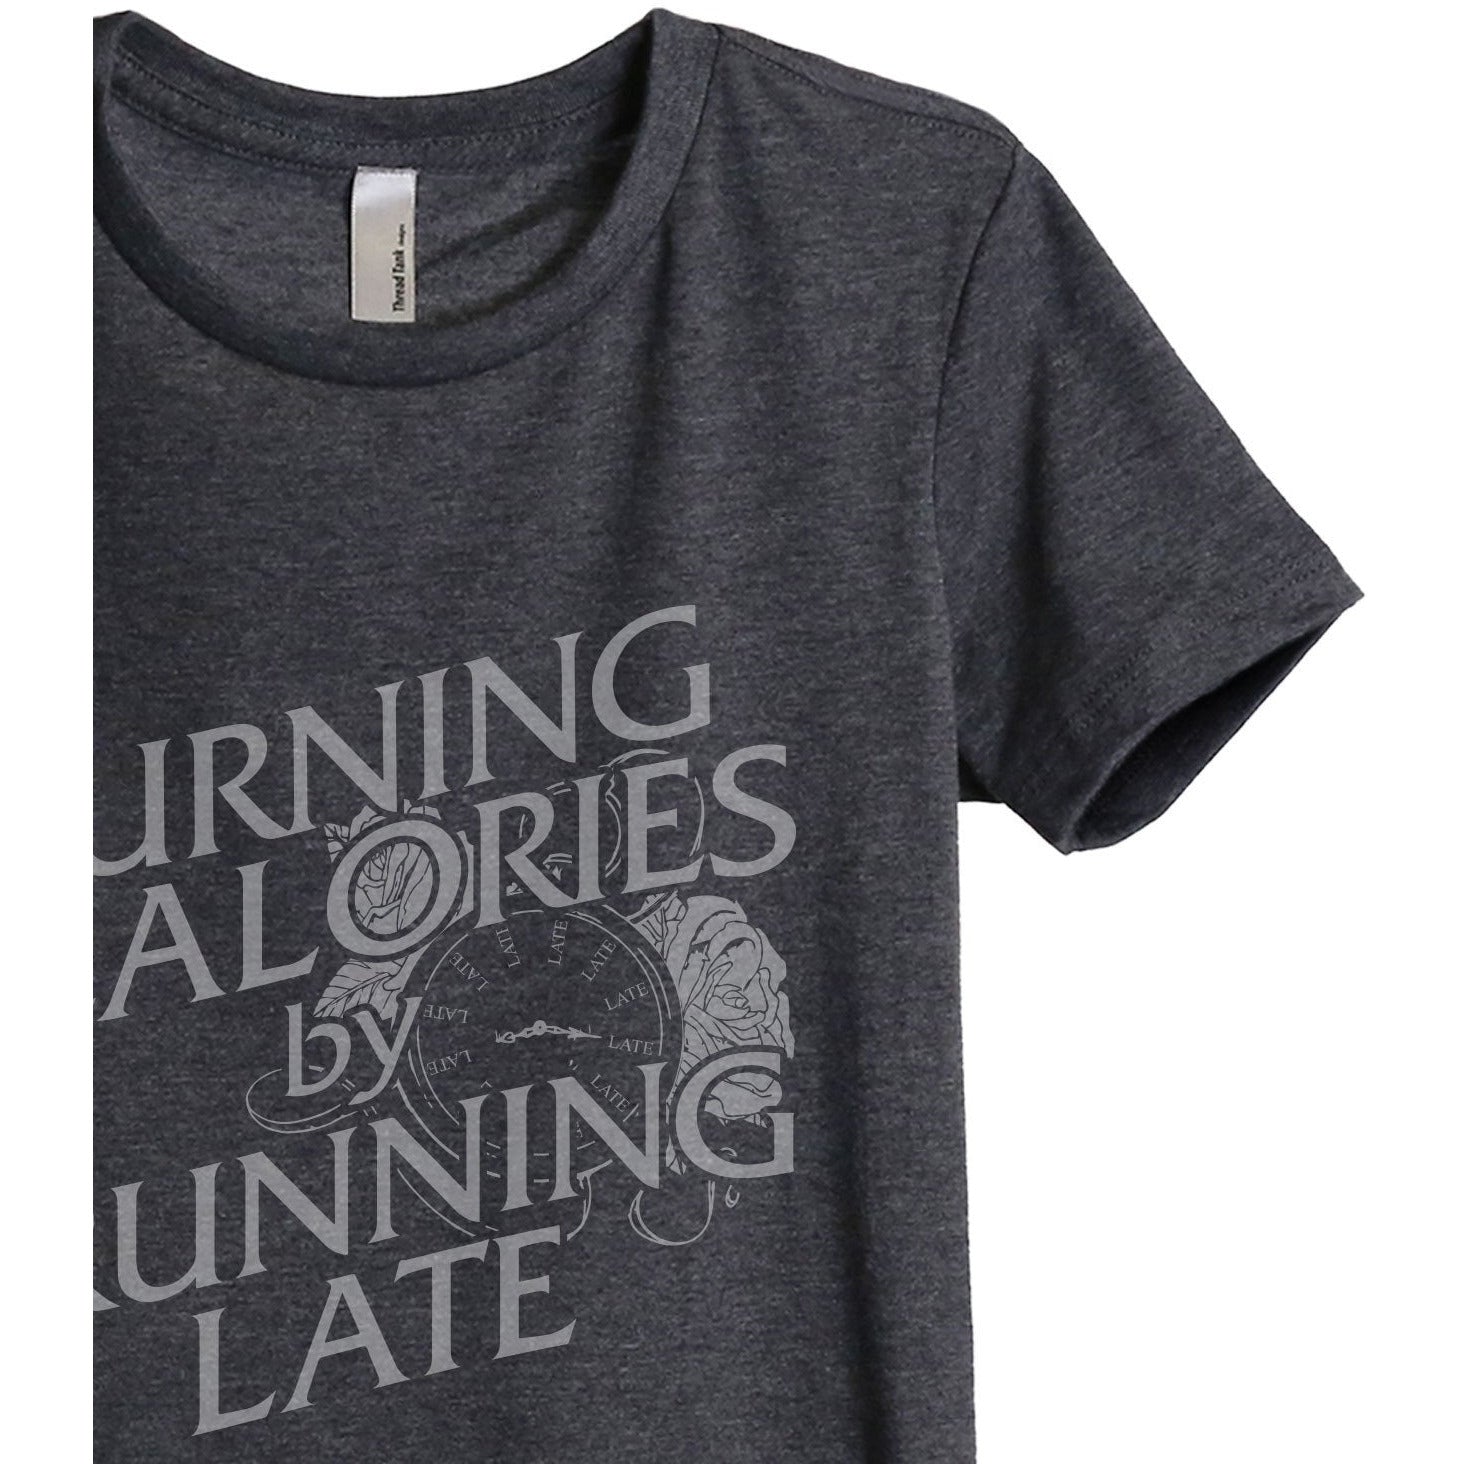 Burning Calories By Running Late Women's Relaxed Crewneck T-Shirt Top Tee Charcoal Grey Zoom Details